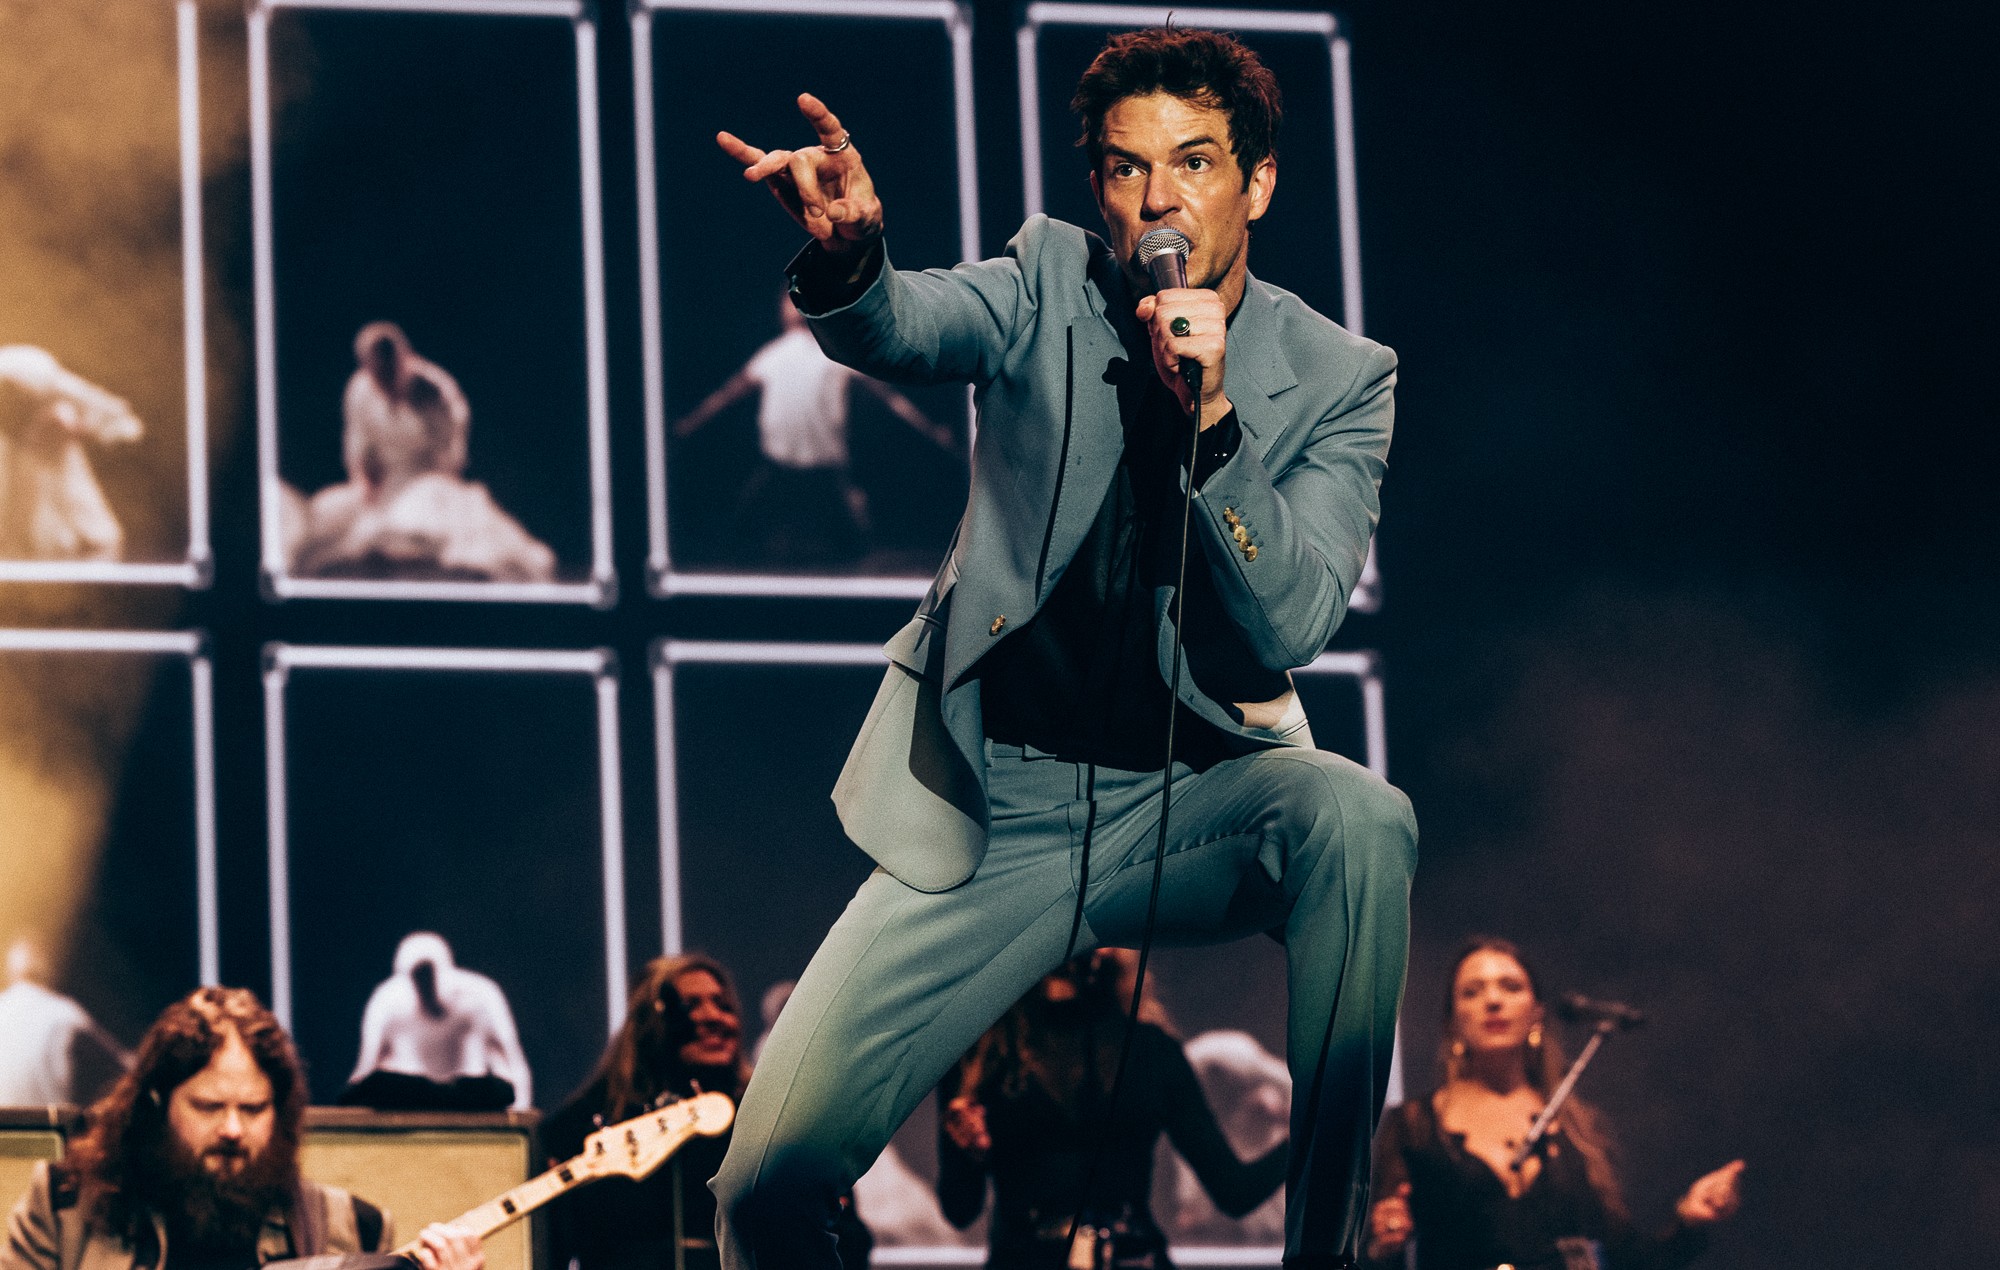 Watch The Killers debut new single ‘Your Side Of Town’ at Reading 2023